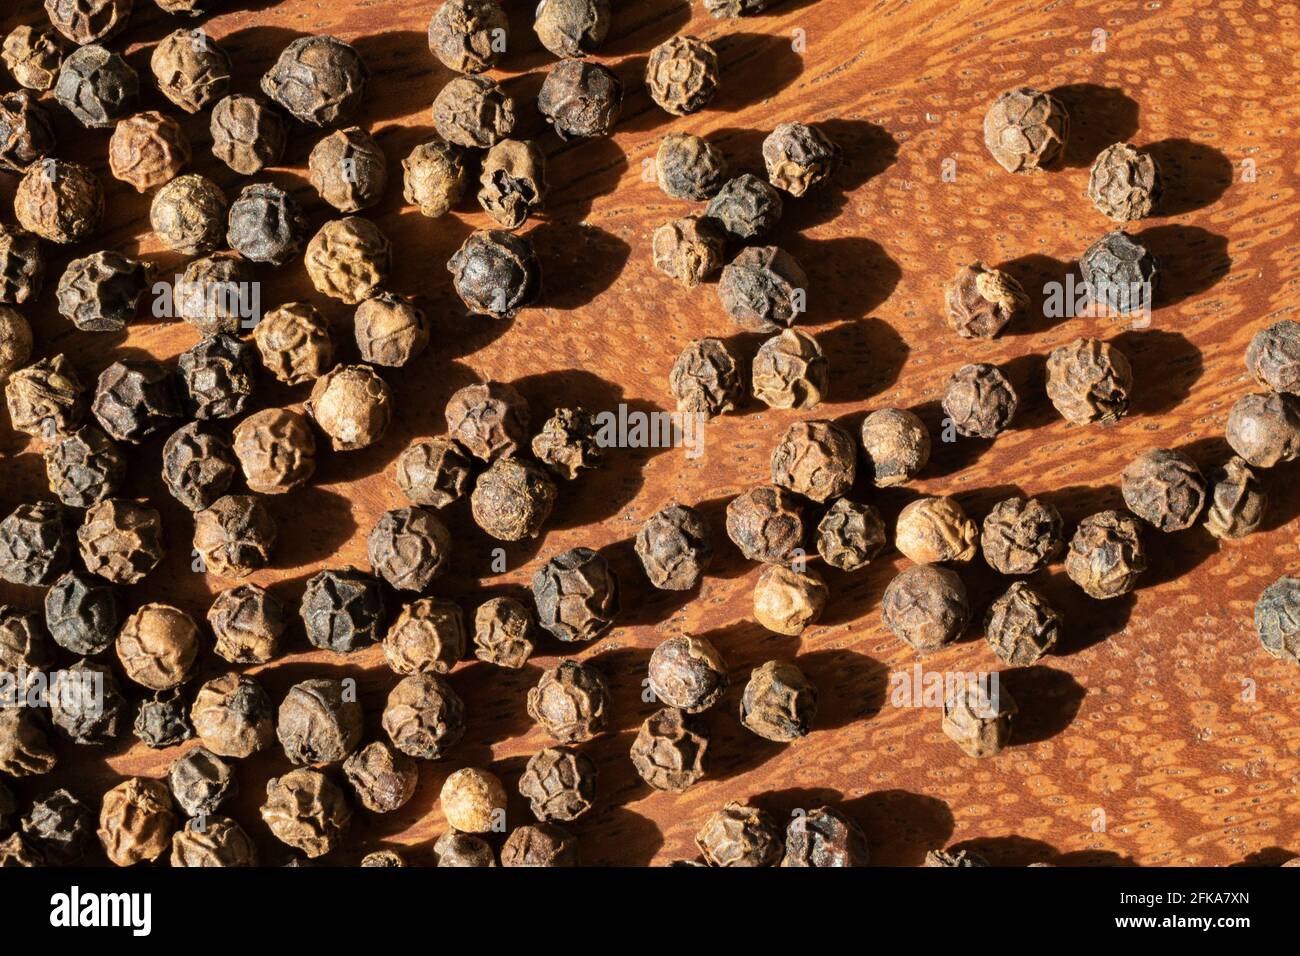 Spicy black peppercorns, Piper nigrum, scattered on a wood surface in the afternoon sun. Stock Photo